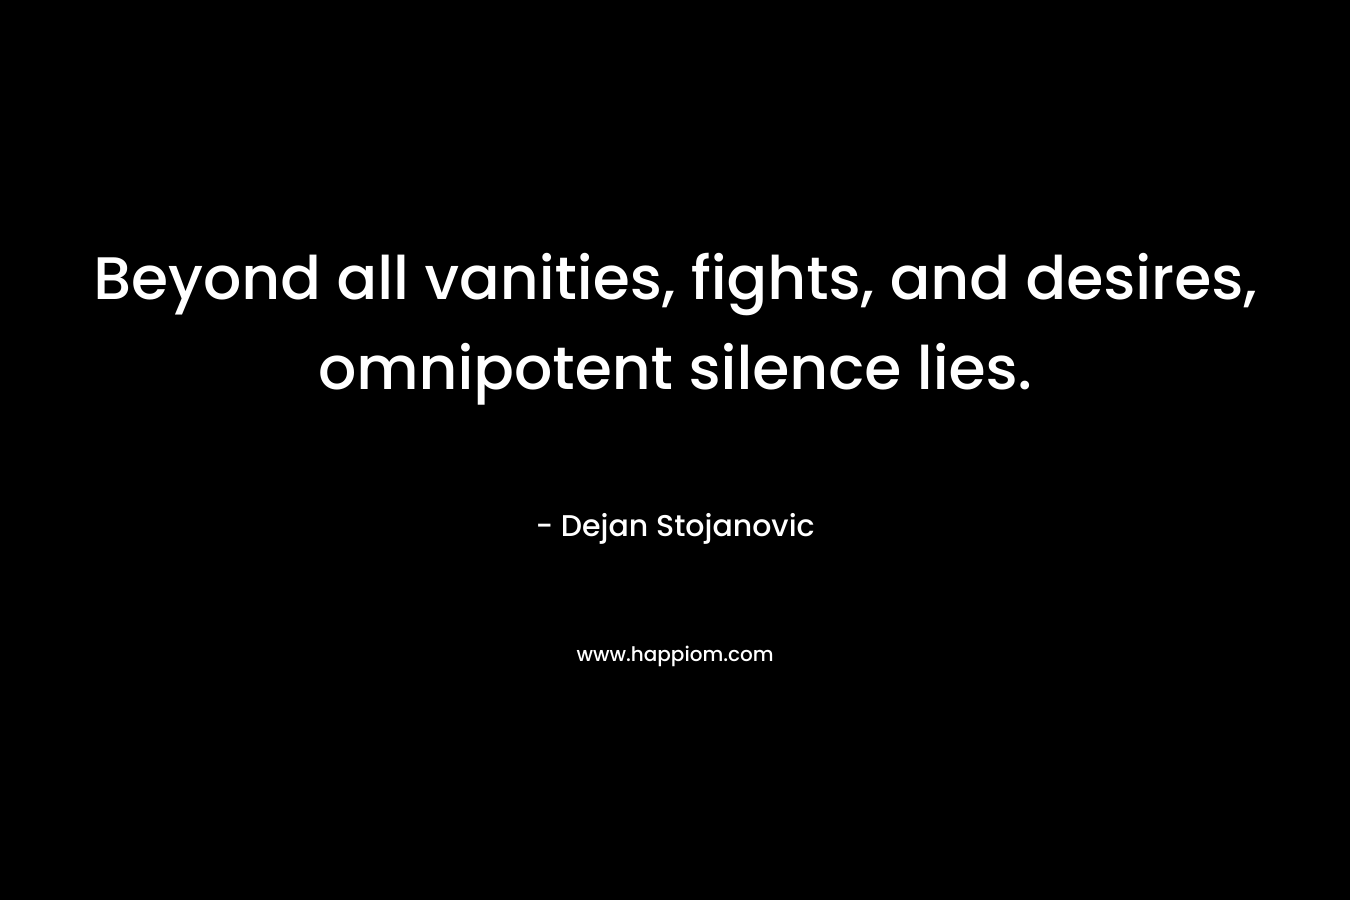 Beyond all vanities, fights, and desires, omnipotent silence lies. – Dejan Stojanovic